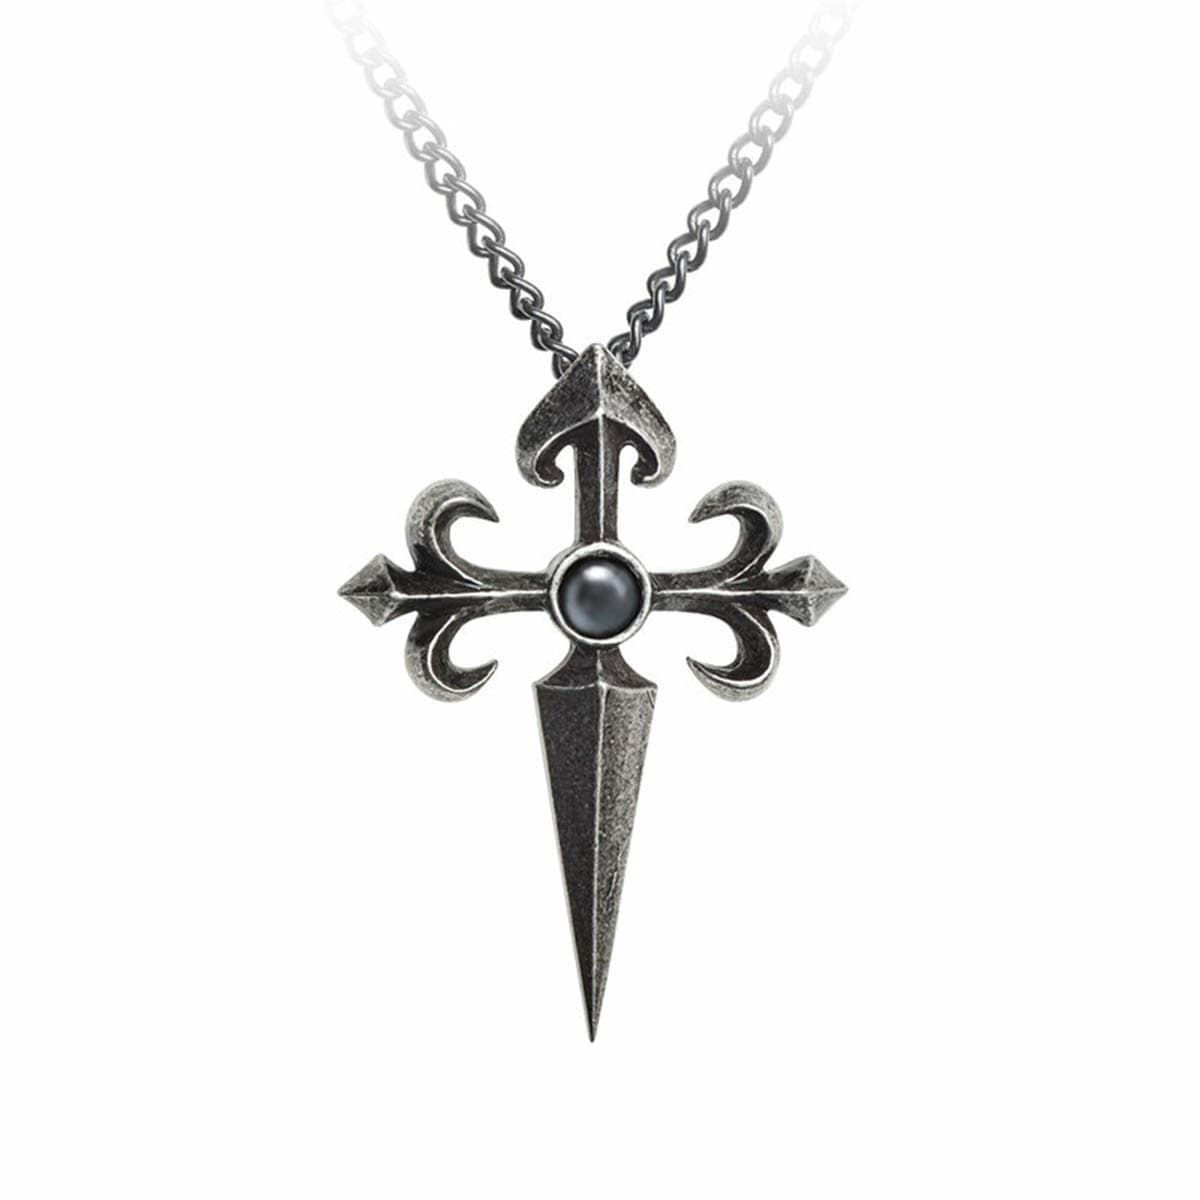 pewter pendant of Cross of St. James or Santiago Cross has fleurs-de-lis arms, a sword-pointed shaft and hematite cabochon 